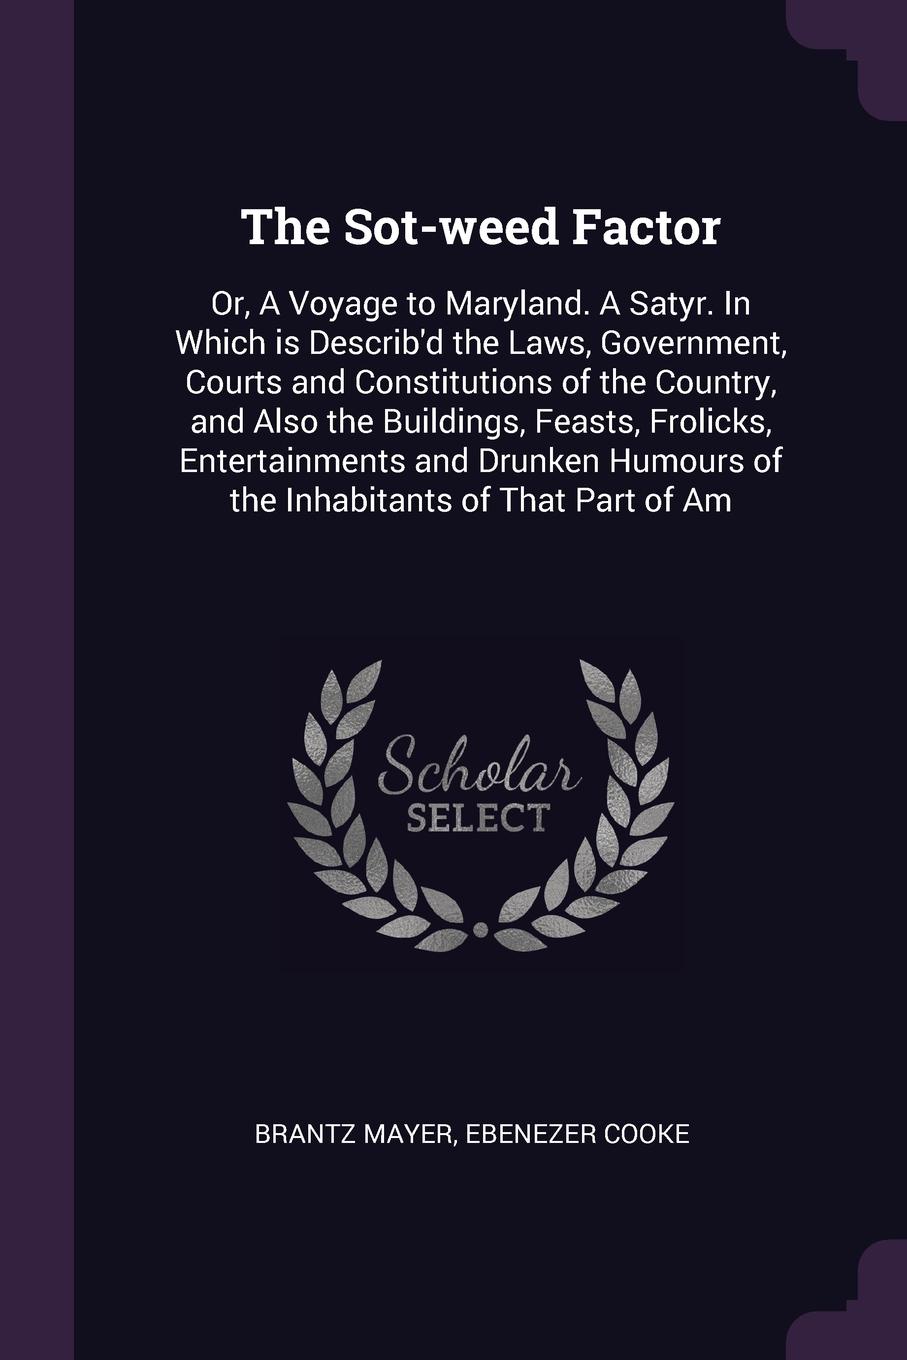 The Sot-weed Factor. Or, A Voyage to Maryland. A Satyr. In Which is Describ`d the Laws, Government, Courts and Constitutions of the Country, and Also the Buildings, Feasts, Frolicks, Entertainments and Drunken Humours of the Inhabitants of That Pa...